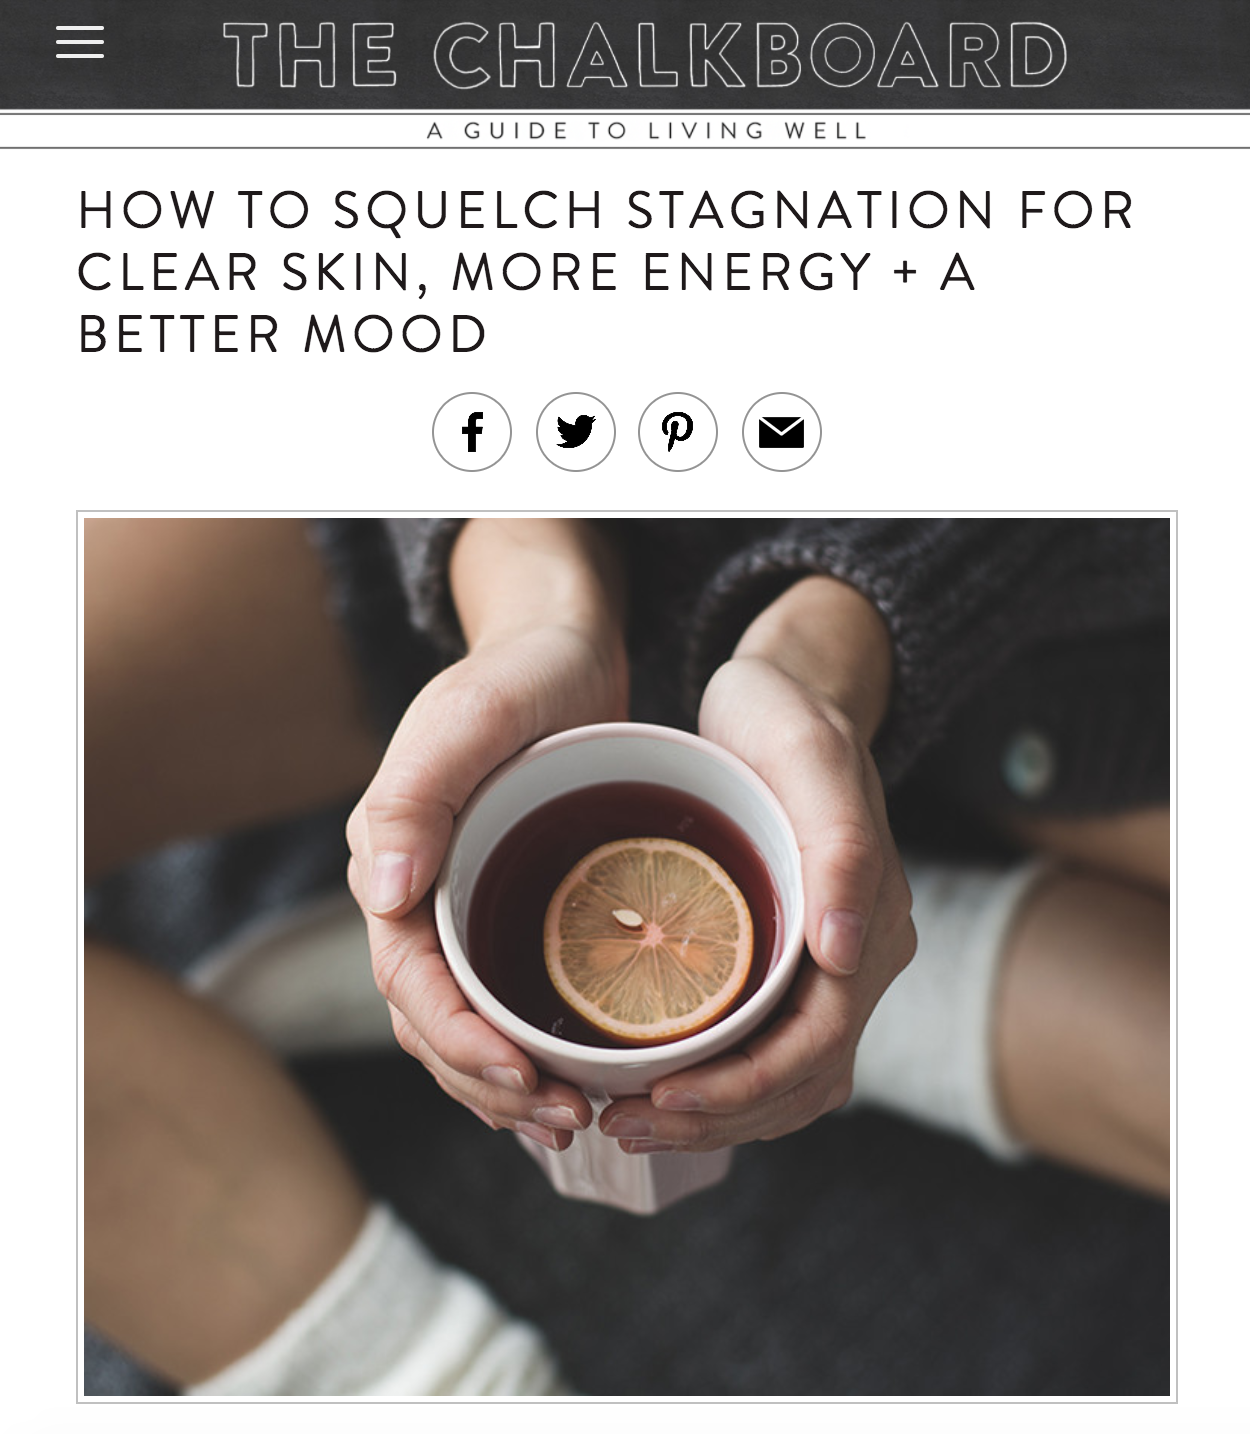 HOW TO SQUELCH STAGNATION FOR CLEAR SKIN, MORE ENERGY + A BETTER MOOD